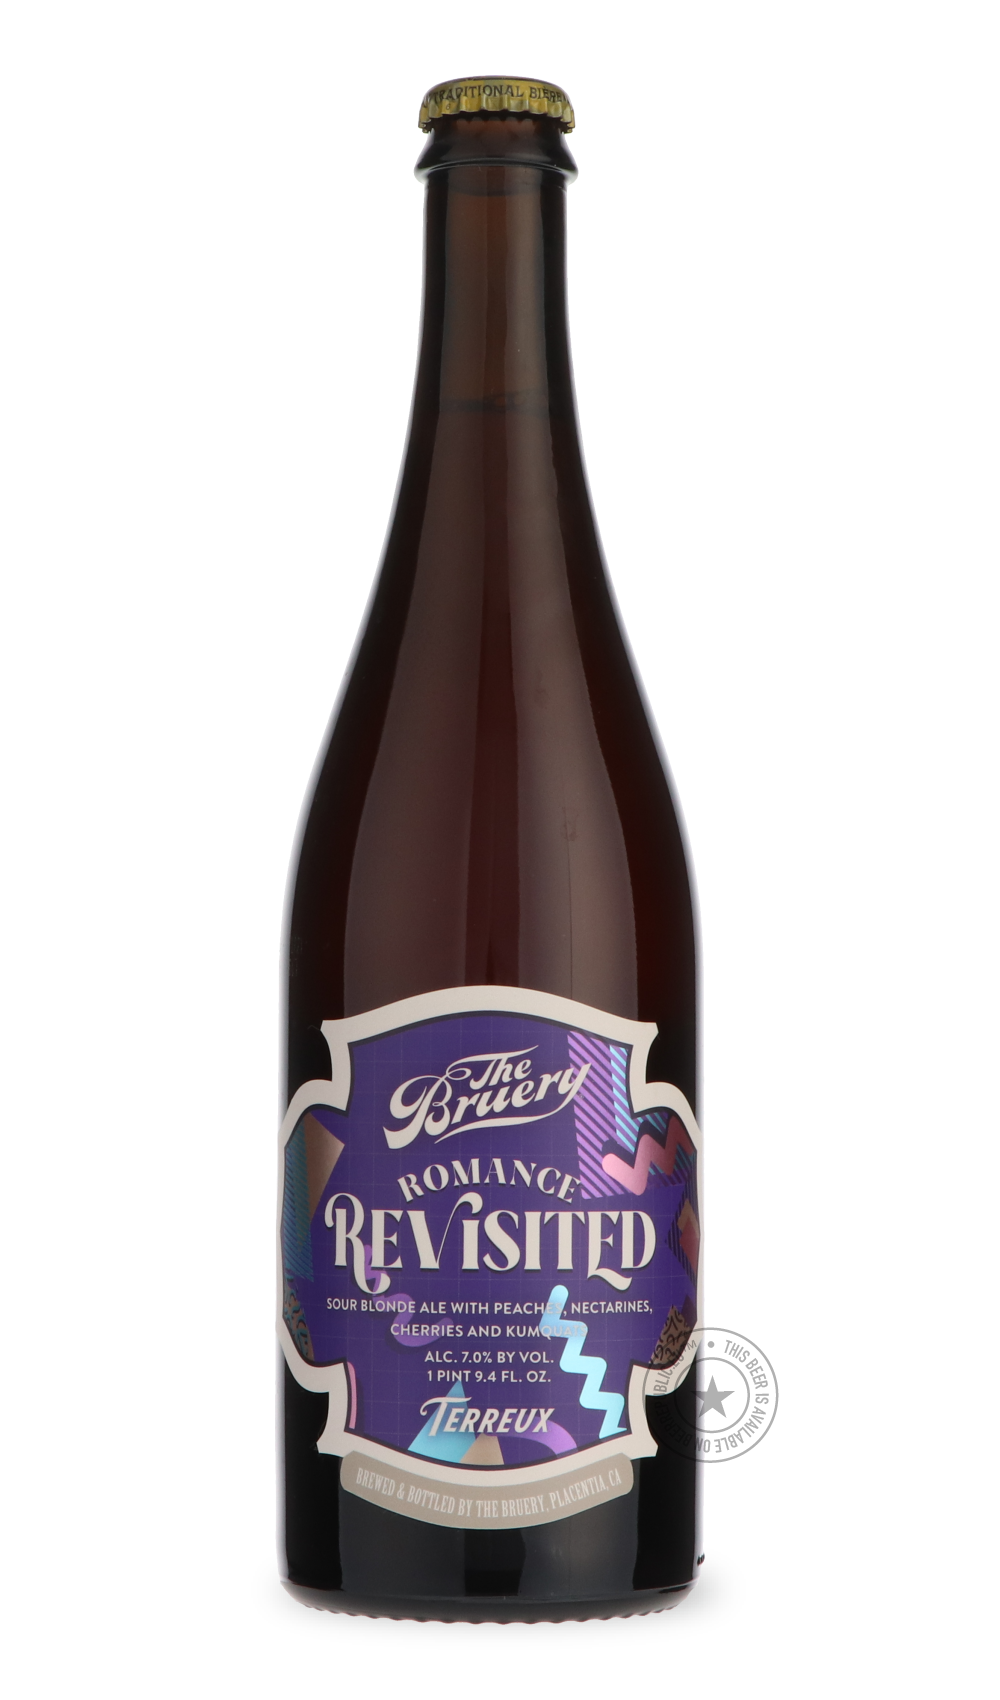 -The Bruery- Romance Revisited-Sour / Wild & Fruity- Only @ Beer Republic - The best online beer store for American & Canadian craft beer - Buy beer online from the USA and Canada - Bier online kopen - Amerikaans bier kopen - Craft beer store - Craft beer kopen - Amerikanisch bier kaufen - Bier online kaufen - Acheter biere online - IPA - Stout - Porter - New England IPA - Hazy IPA - Imperial Stout - Barrel Aged - Barrel Aged Imperial Stout - Brown - Dark beer - Blond - Blonde - Pilsner - Lager - Wheat - We